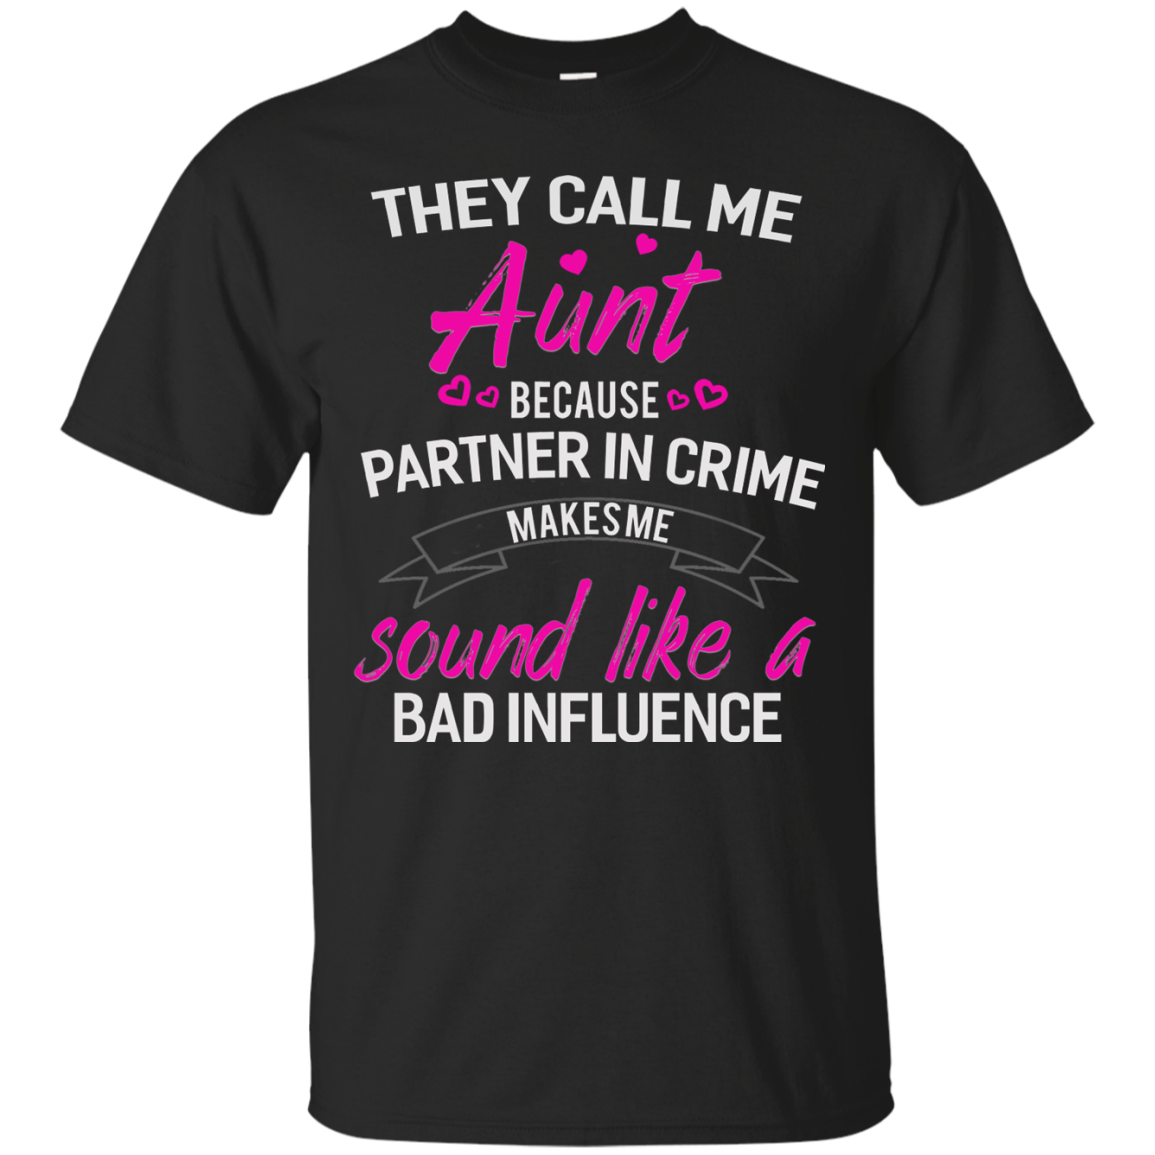 They call me Aunt because partner in crime makes me sound like a bad influence shirt